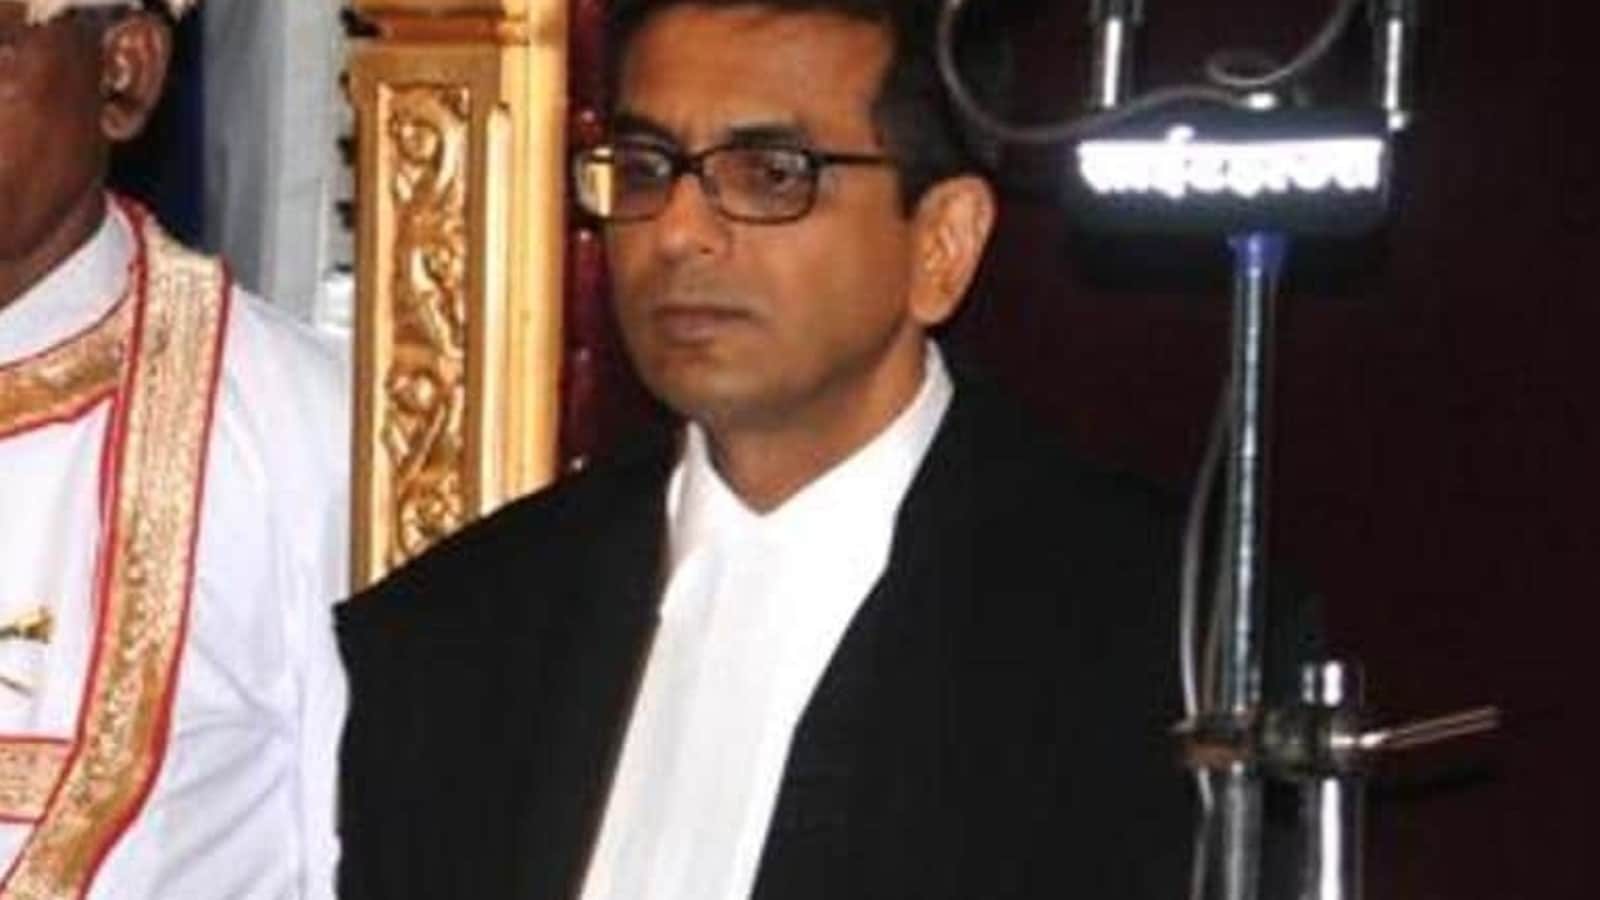 chief-justice-uu-lalit-recommends-justice-dy-chandrachud-as-his-successor